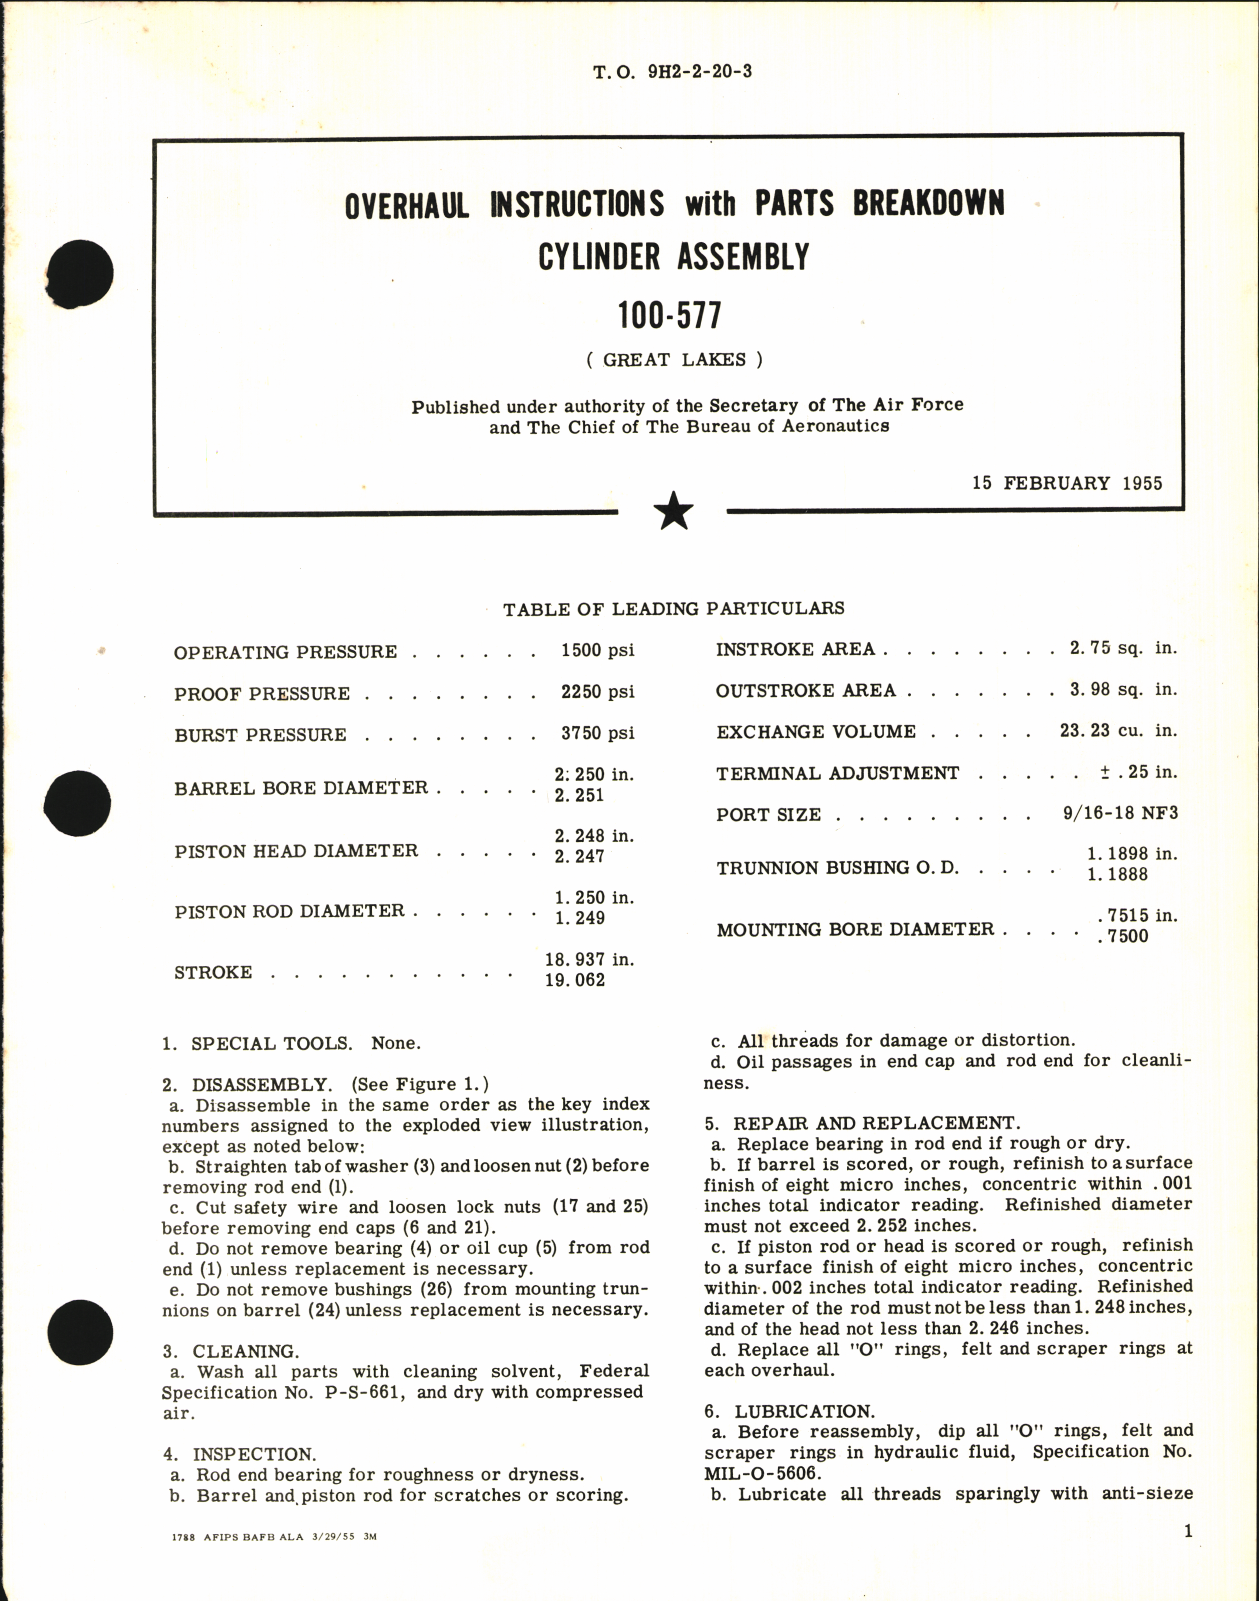 Sample page 1 from AirCorps Library document: Overhaul Instructions with Parts Breakdown For Cylinder Assembly 100-577